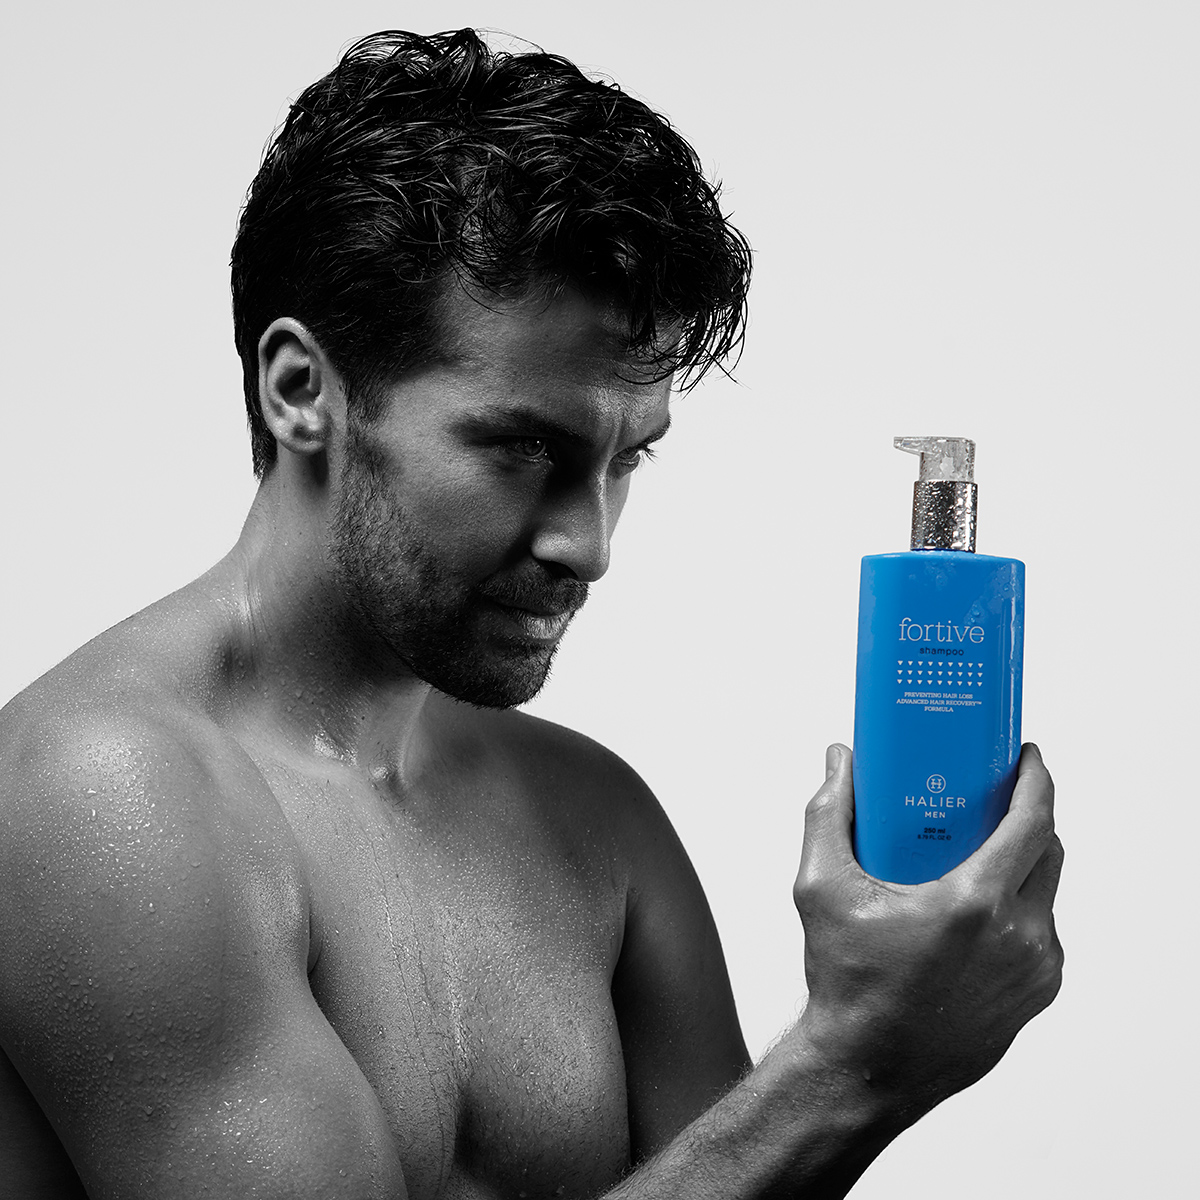 Black and white promotional image featuring a man holding a bottle of Hairvity hair care supplements.